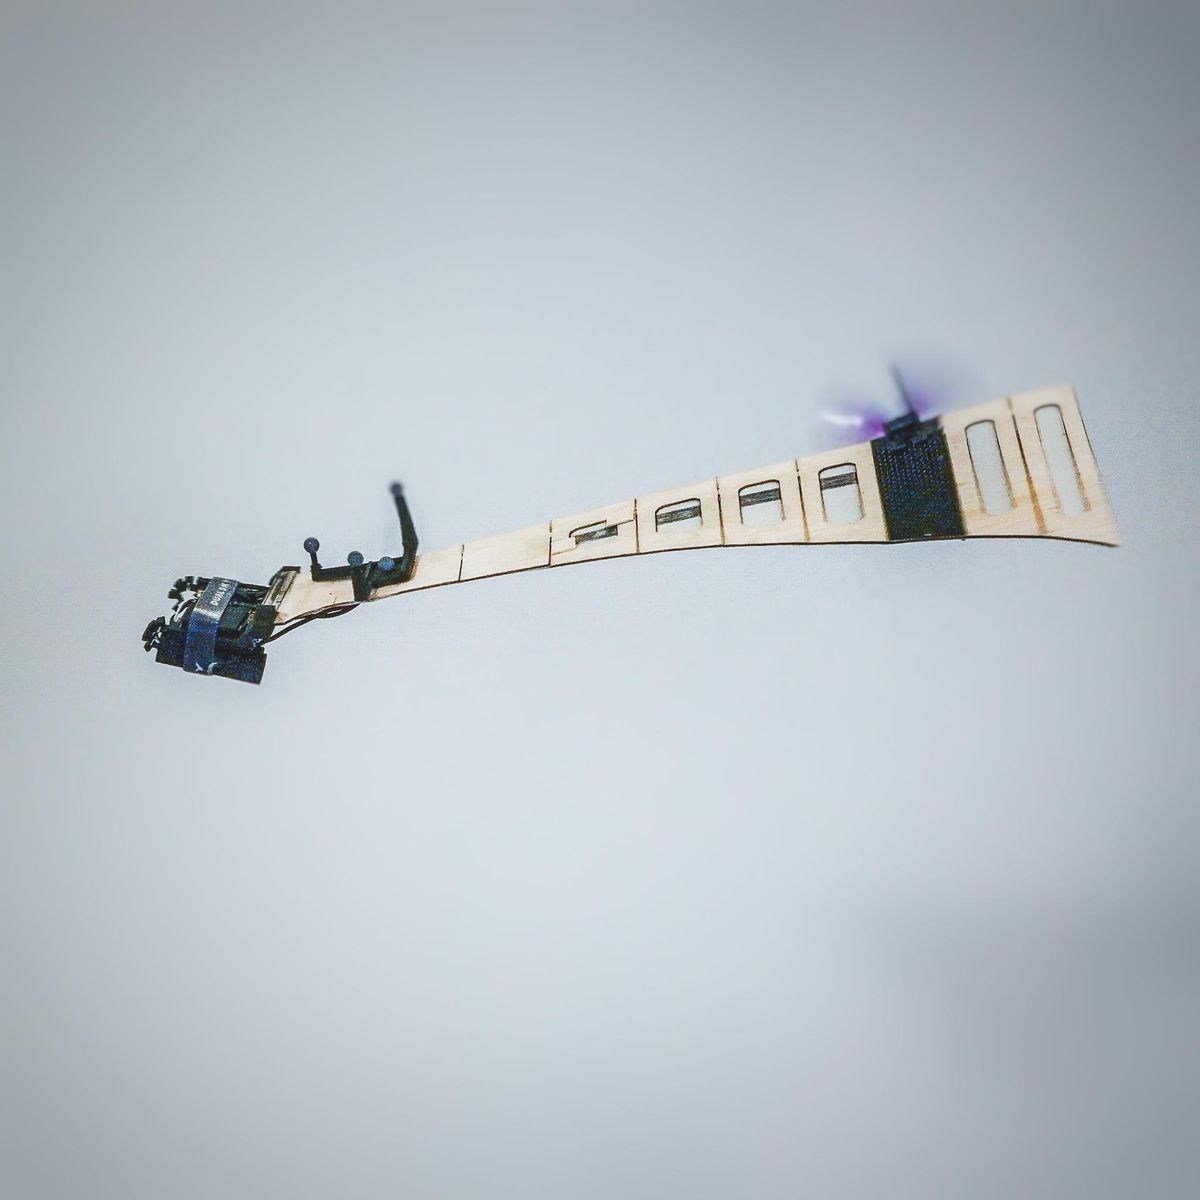 An in flight picture of a single wing drone made out of balsa wood with batteries on one end and a propeller on the other